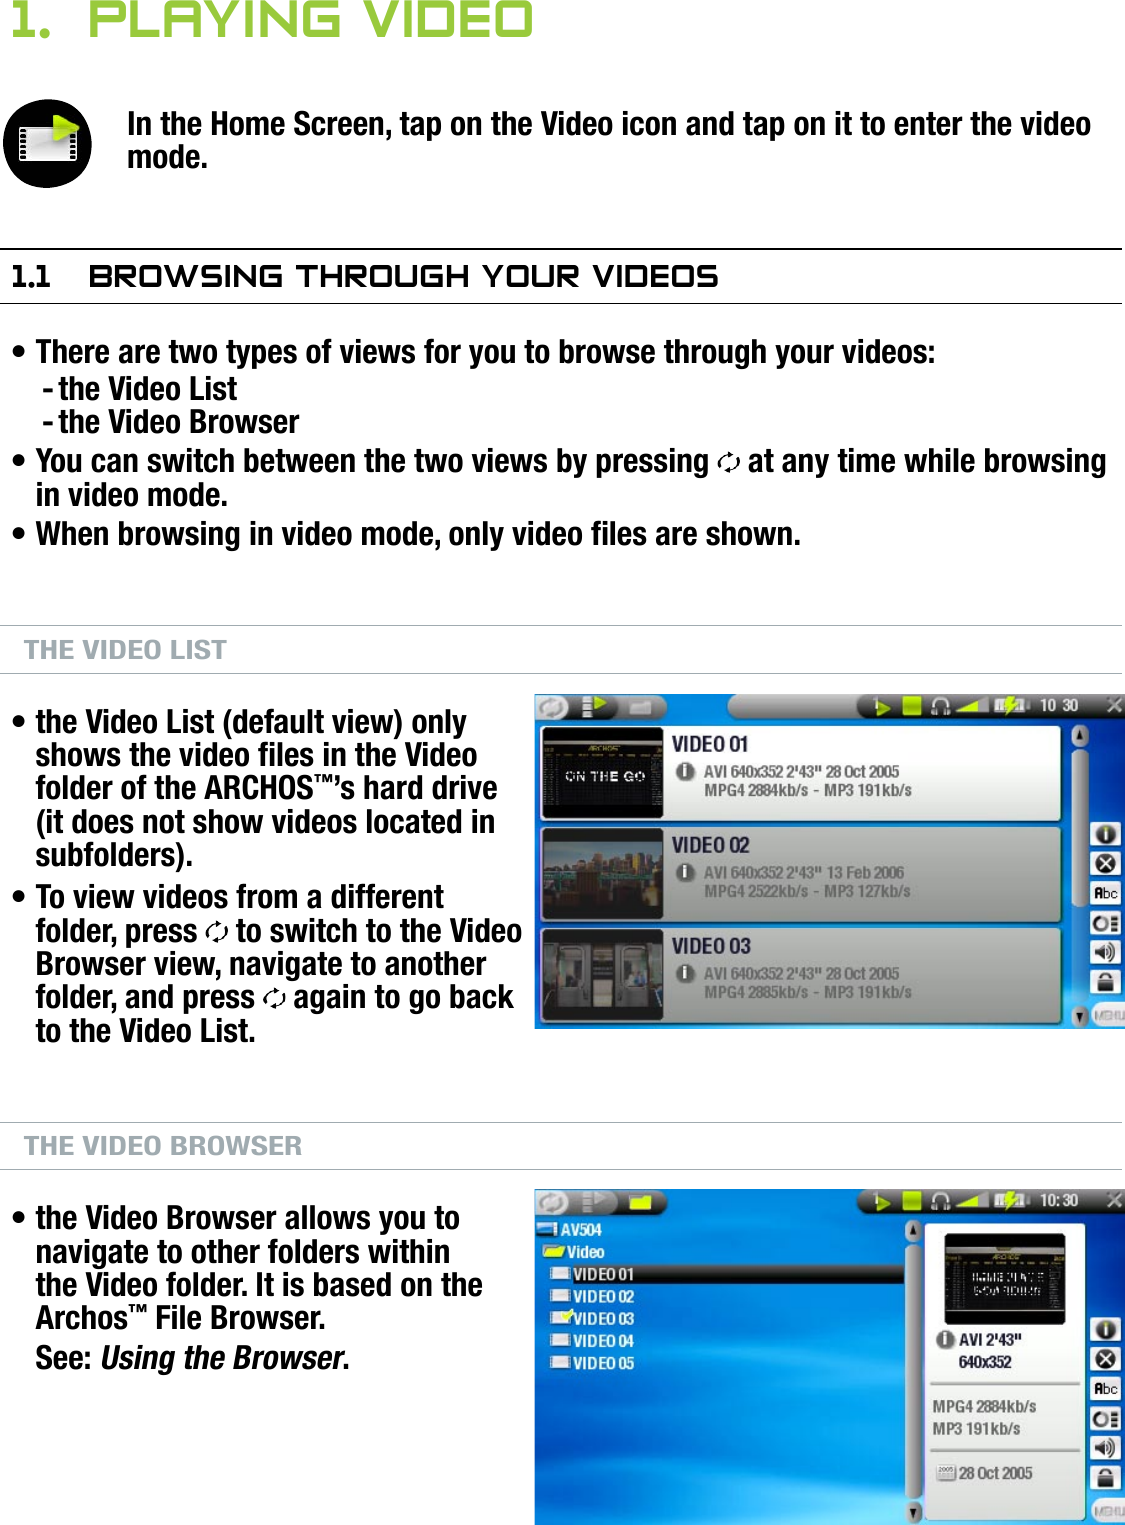 704MANUAL V0.0PLAYING VIDEO   &gt;   p. 81.  Playing VideOIn the Home Screen, tap on the Video icon and tap on it to enter the video mode.1.1  brOwsing ThrOugh yOur VideOsThere are two types of views for you to browse through your videos:the Video Listthe Video BrowserYou can switch between the two views by pressing   at any time while browsing in video mode.When browsing in video mode, only video les are shown.THE VIDEO LISTthe Video List (default view) only shows the video les in the Video folder of the ARCHOS™’s hard drive (it does not show videos located in subfolders).To view videos from a different folder, press   to switch to the Video Browser view, navigate to another folder, and press   again to go back to the Video List.THE VIDEO BROWSERthe Video Browser allows you to navigate to other folders within the Video folder. It is based on the Archos™ File Browser.See: Using the Browser.•--•••••